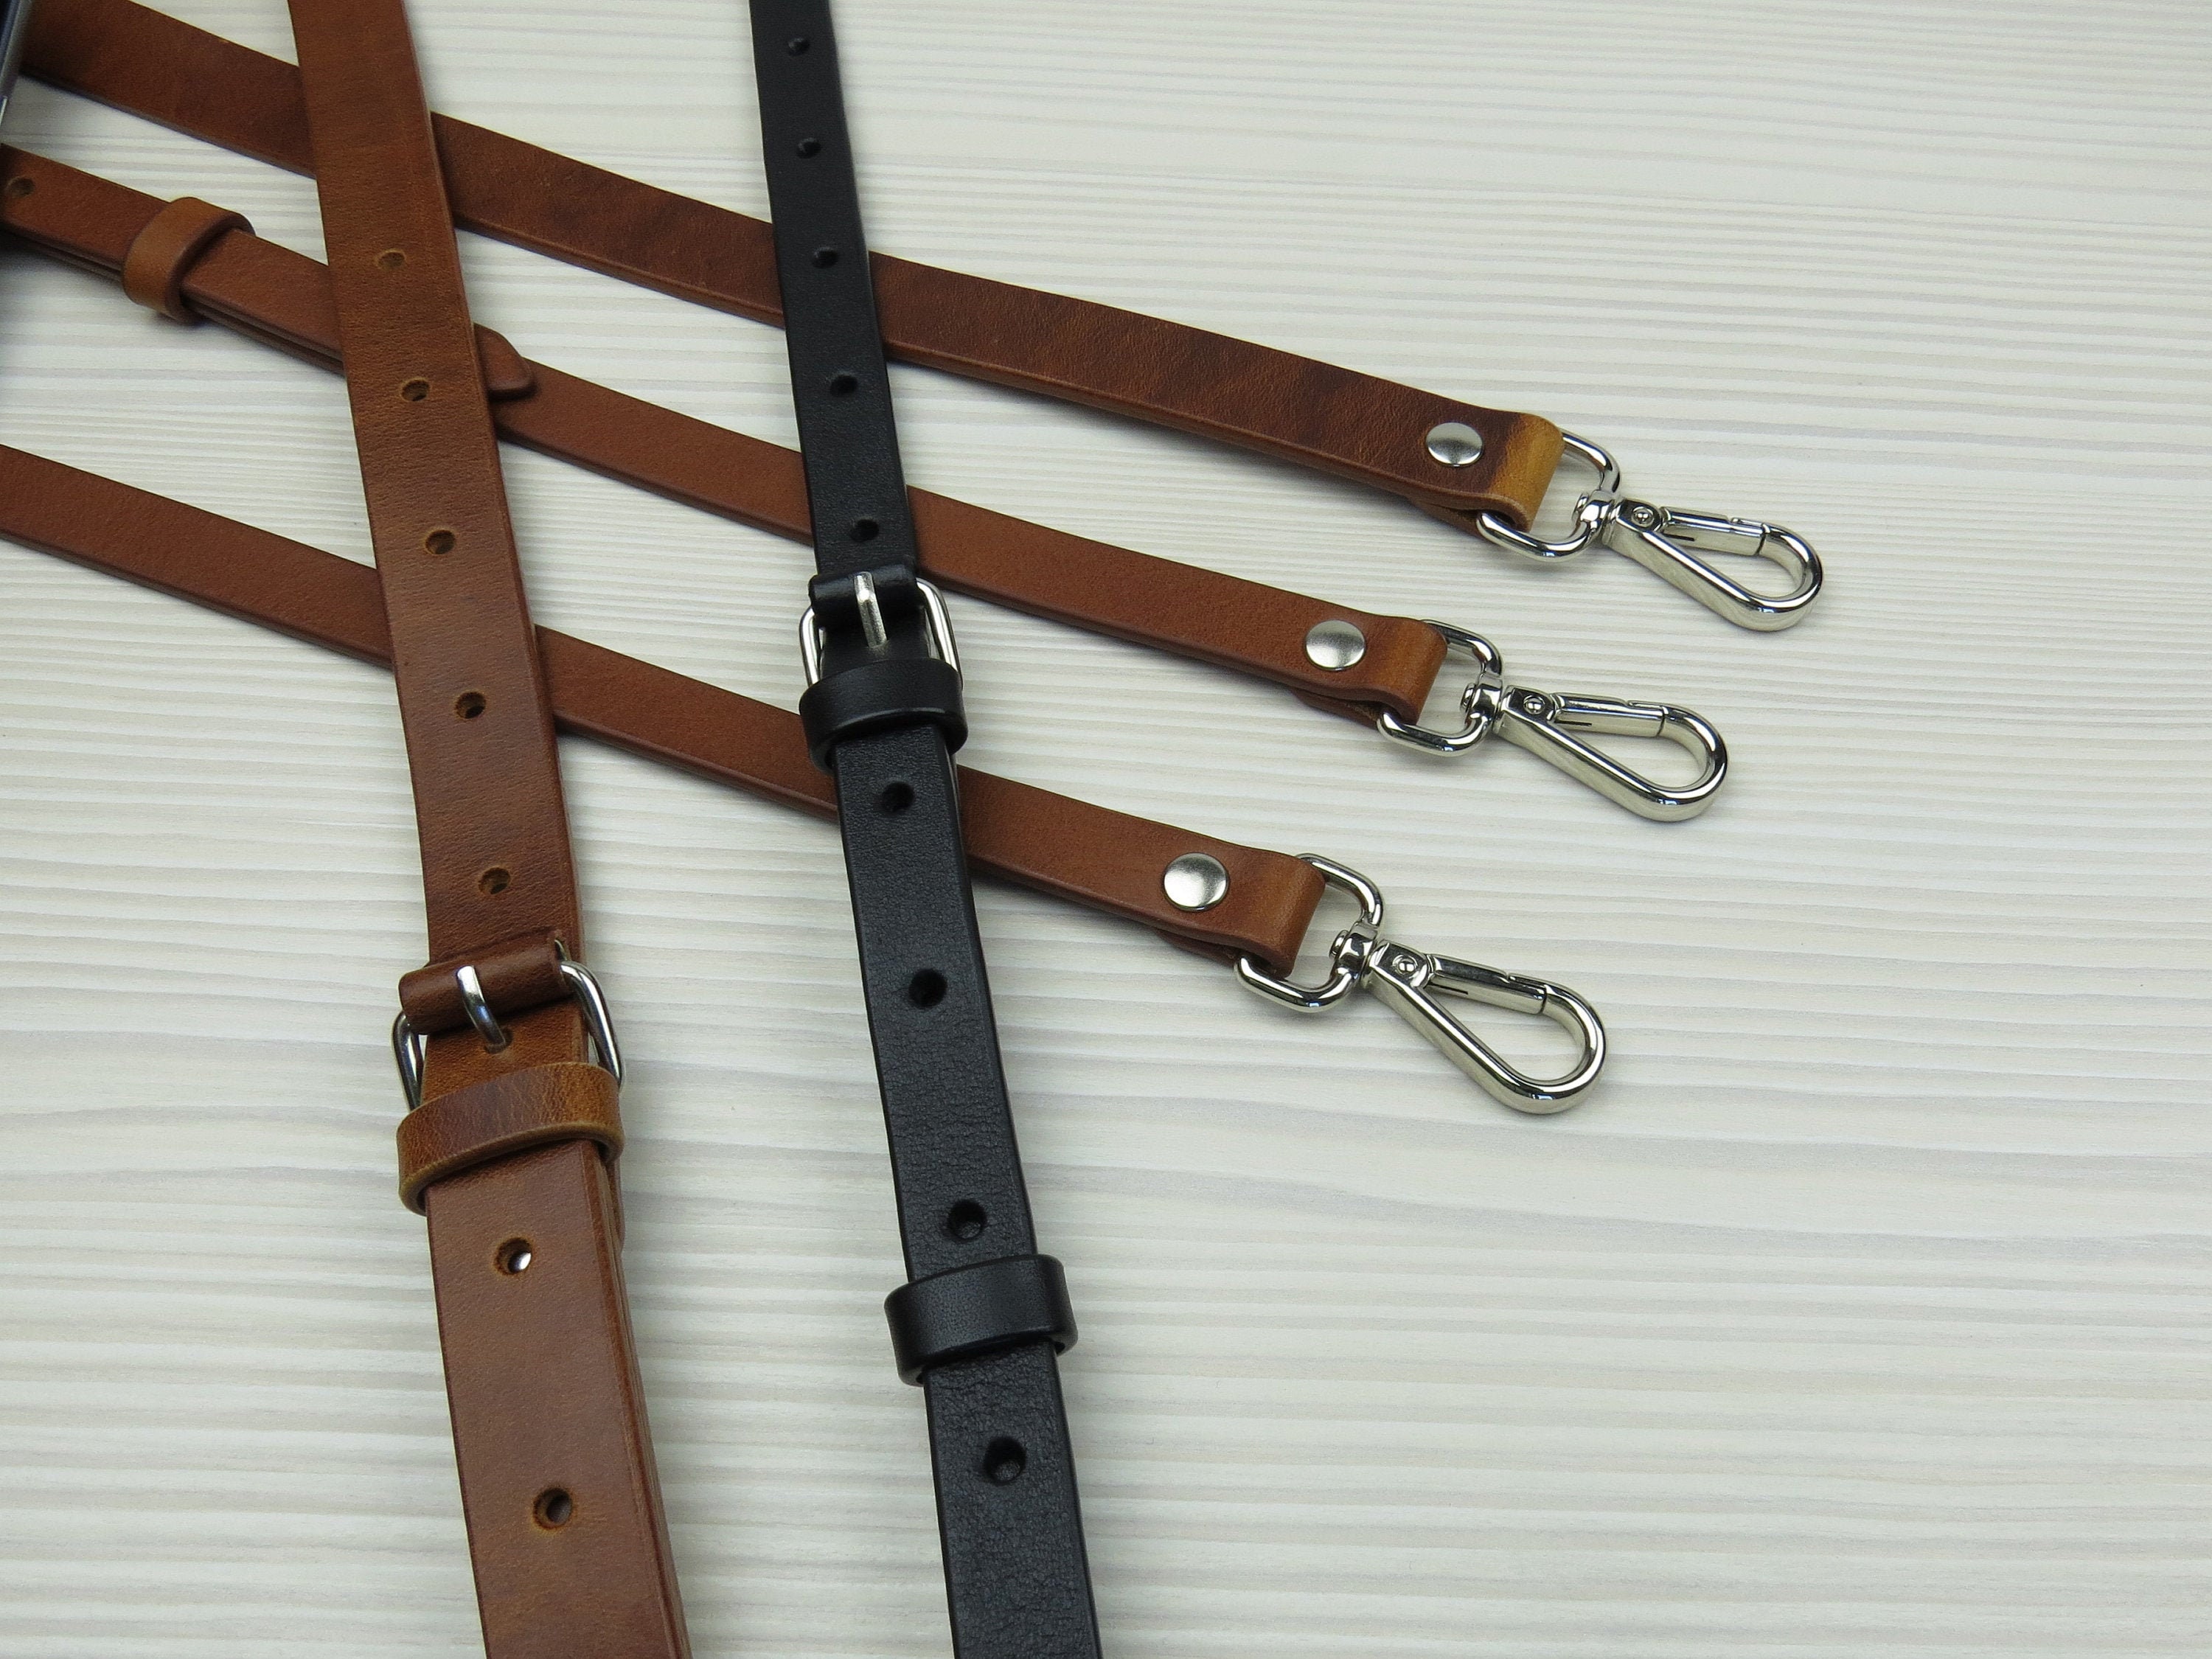 Adjustable Extender for Purse Strap, Extension Bag Strap, Vegan Leather Purse  Strap Extender, Additional Strap for Bags and Purses to Extend 